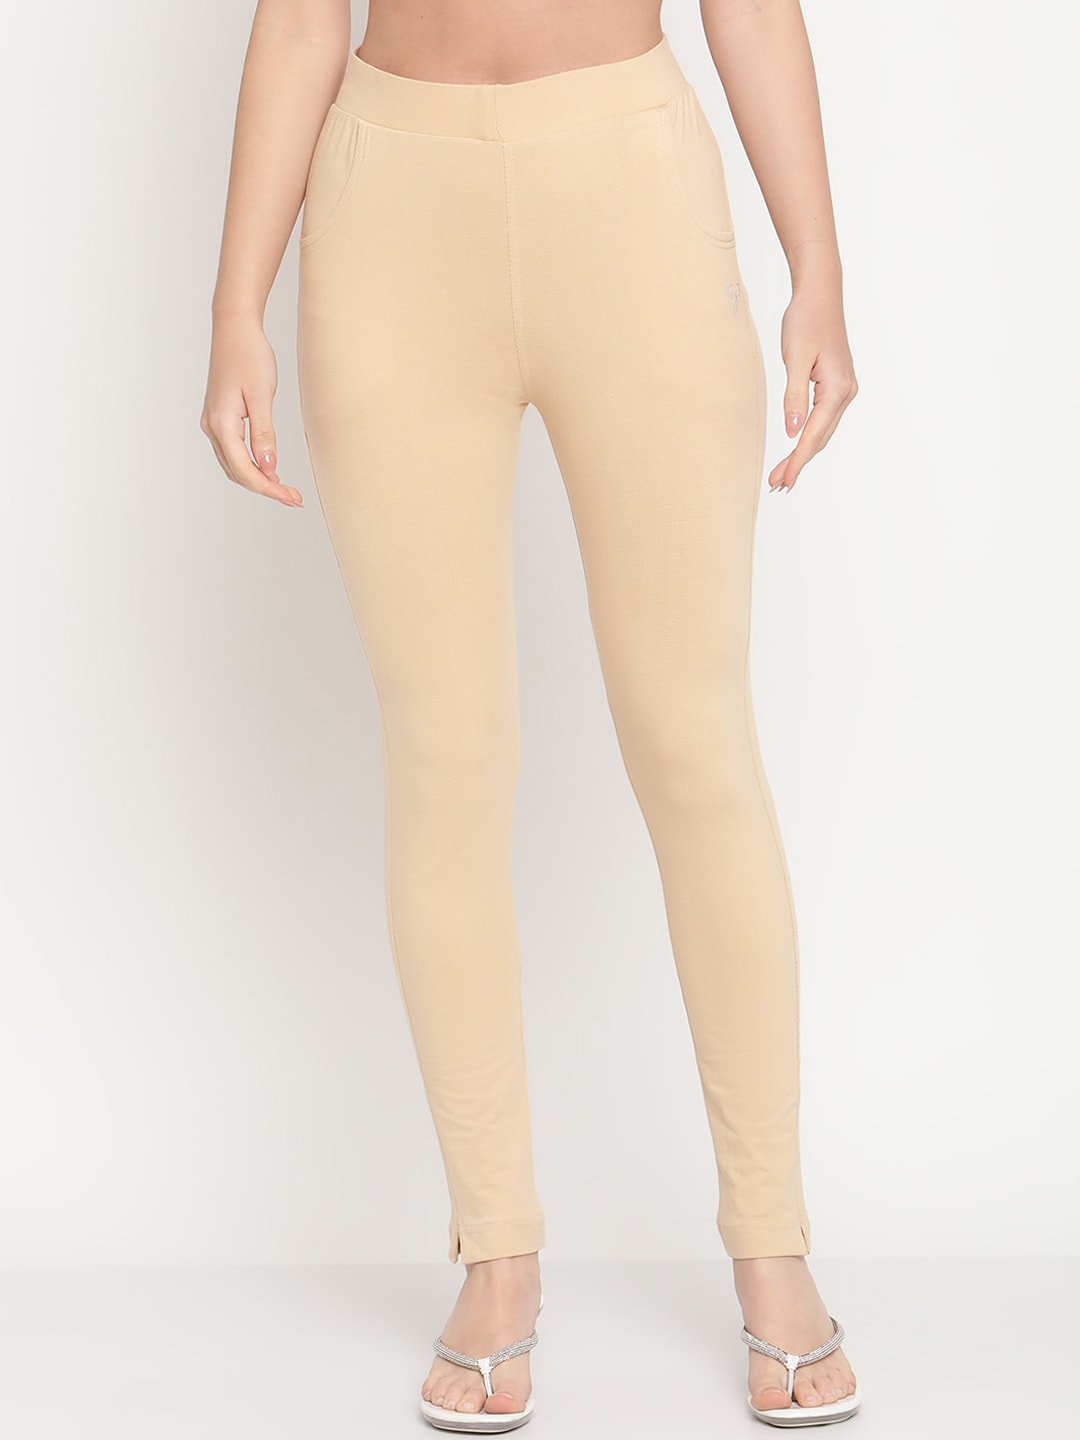 TAG 7 Women Beige Solid Ankle-Length Leggings Price in India